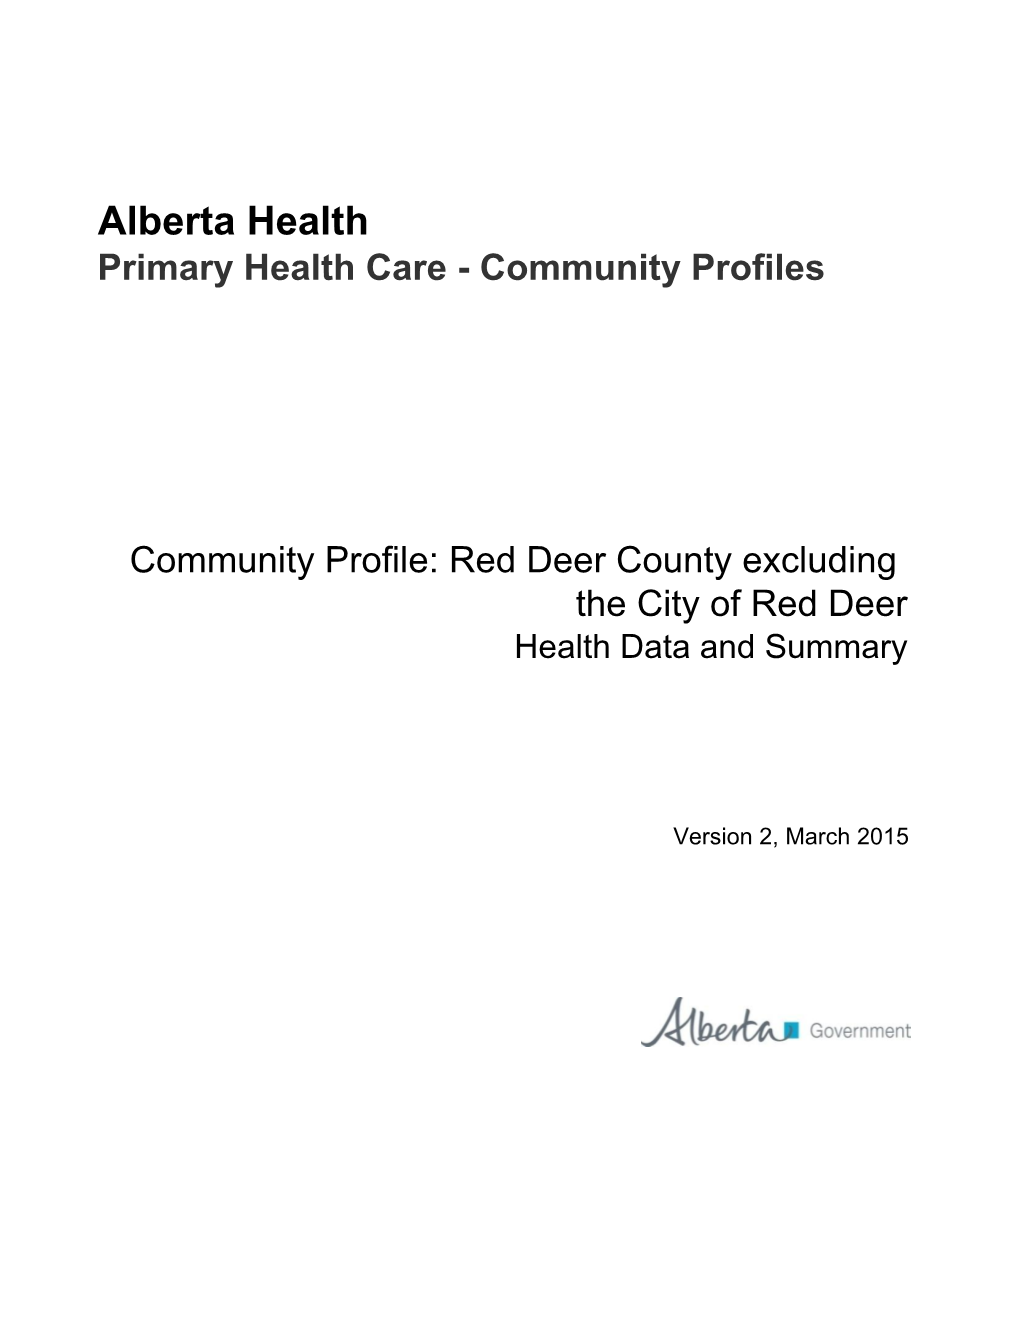 Red Deer County Excluding the City of Red Deer Health Data and Summary